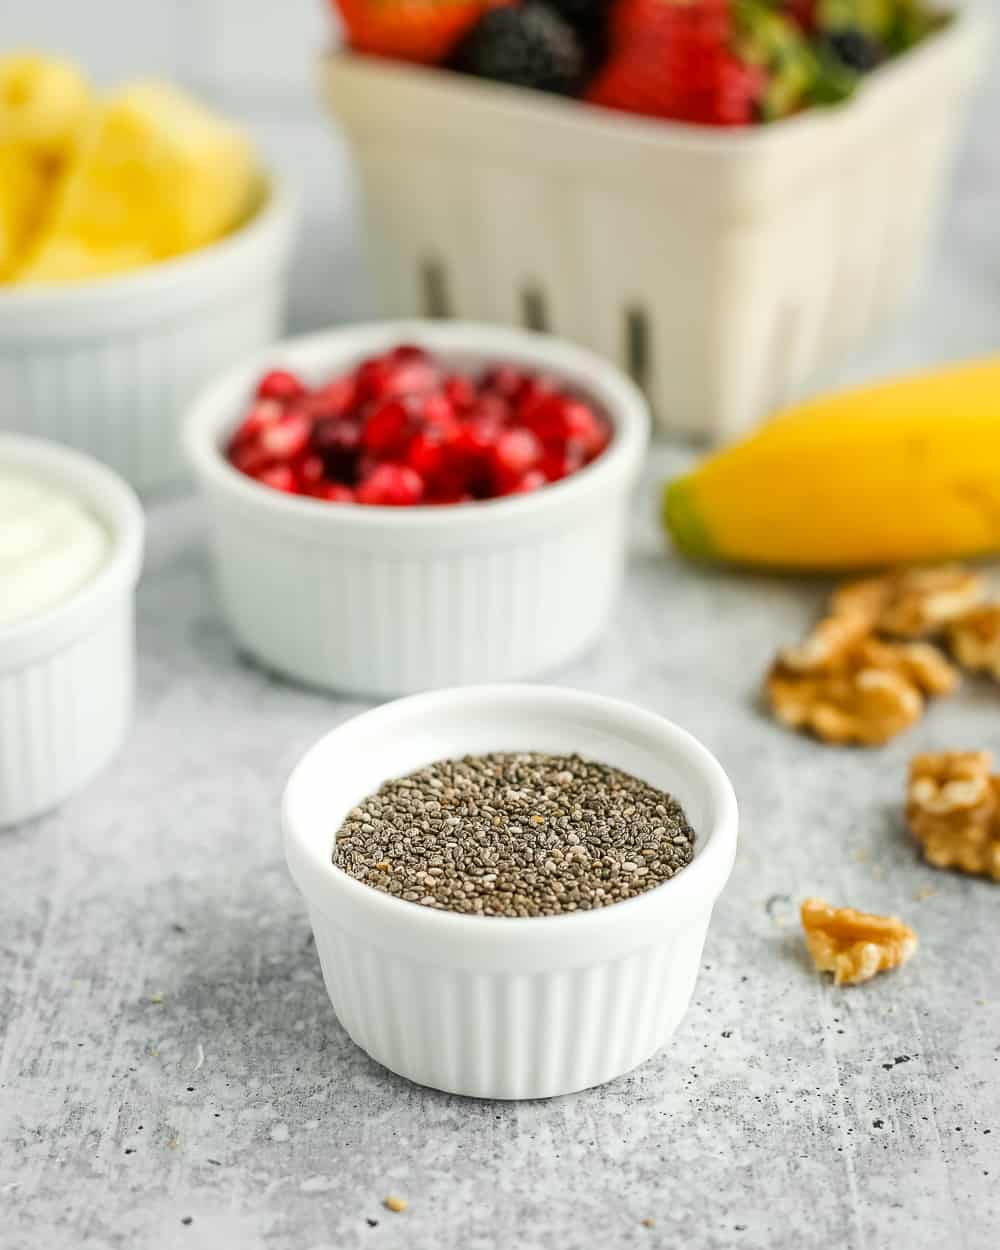 A small white ramekin of chia seeds with pomegranate, an unpeeled banana, fresh berries, chopped pineapple, and walnuts in the background